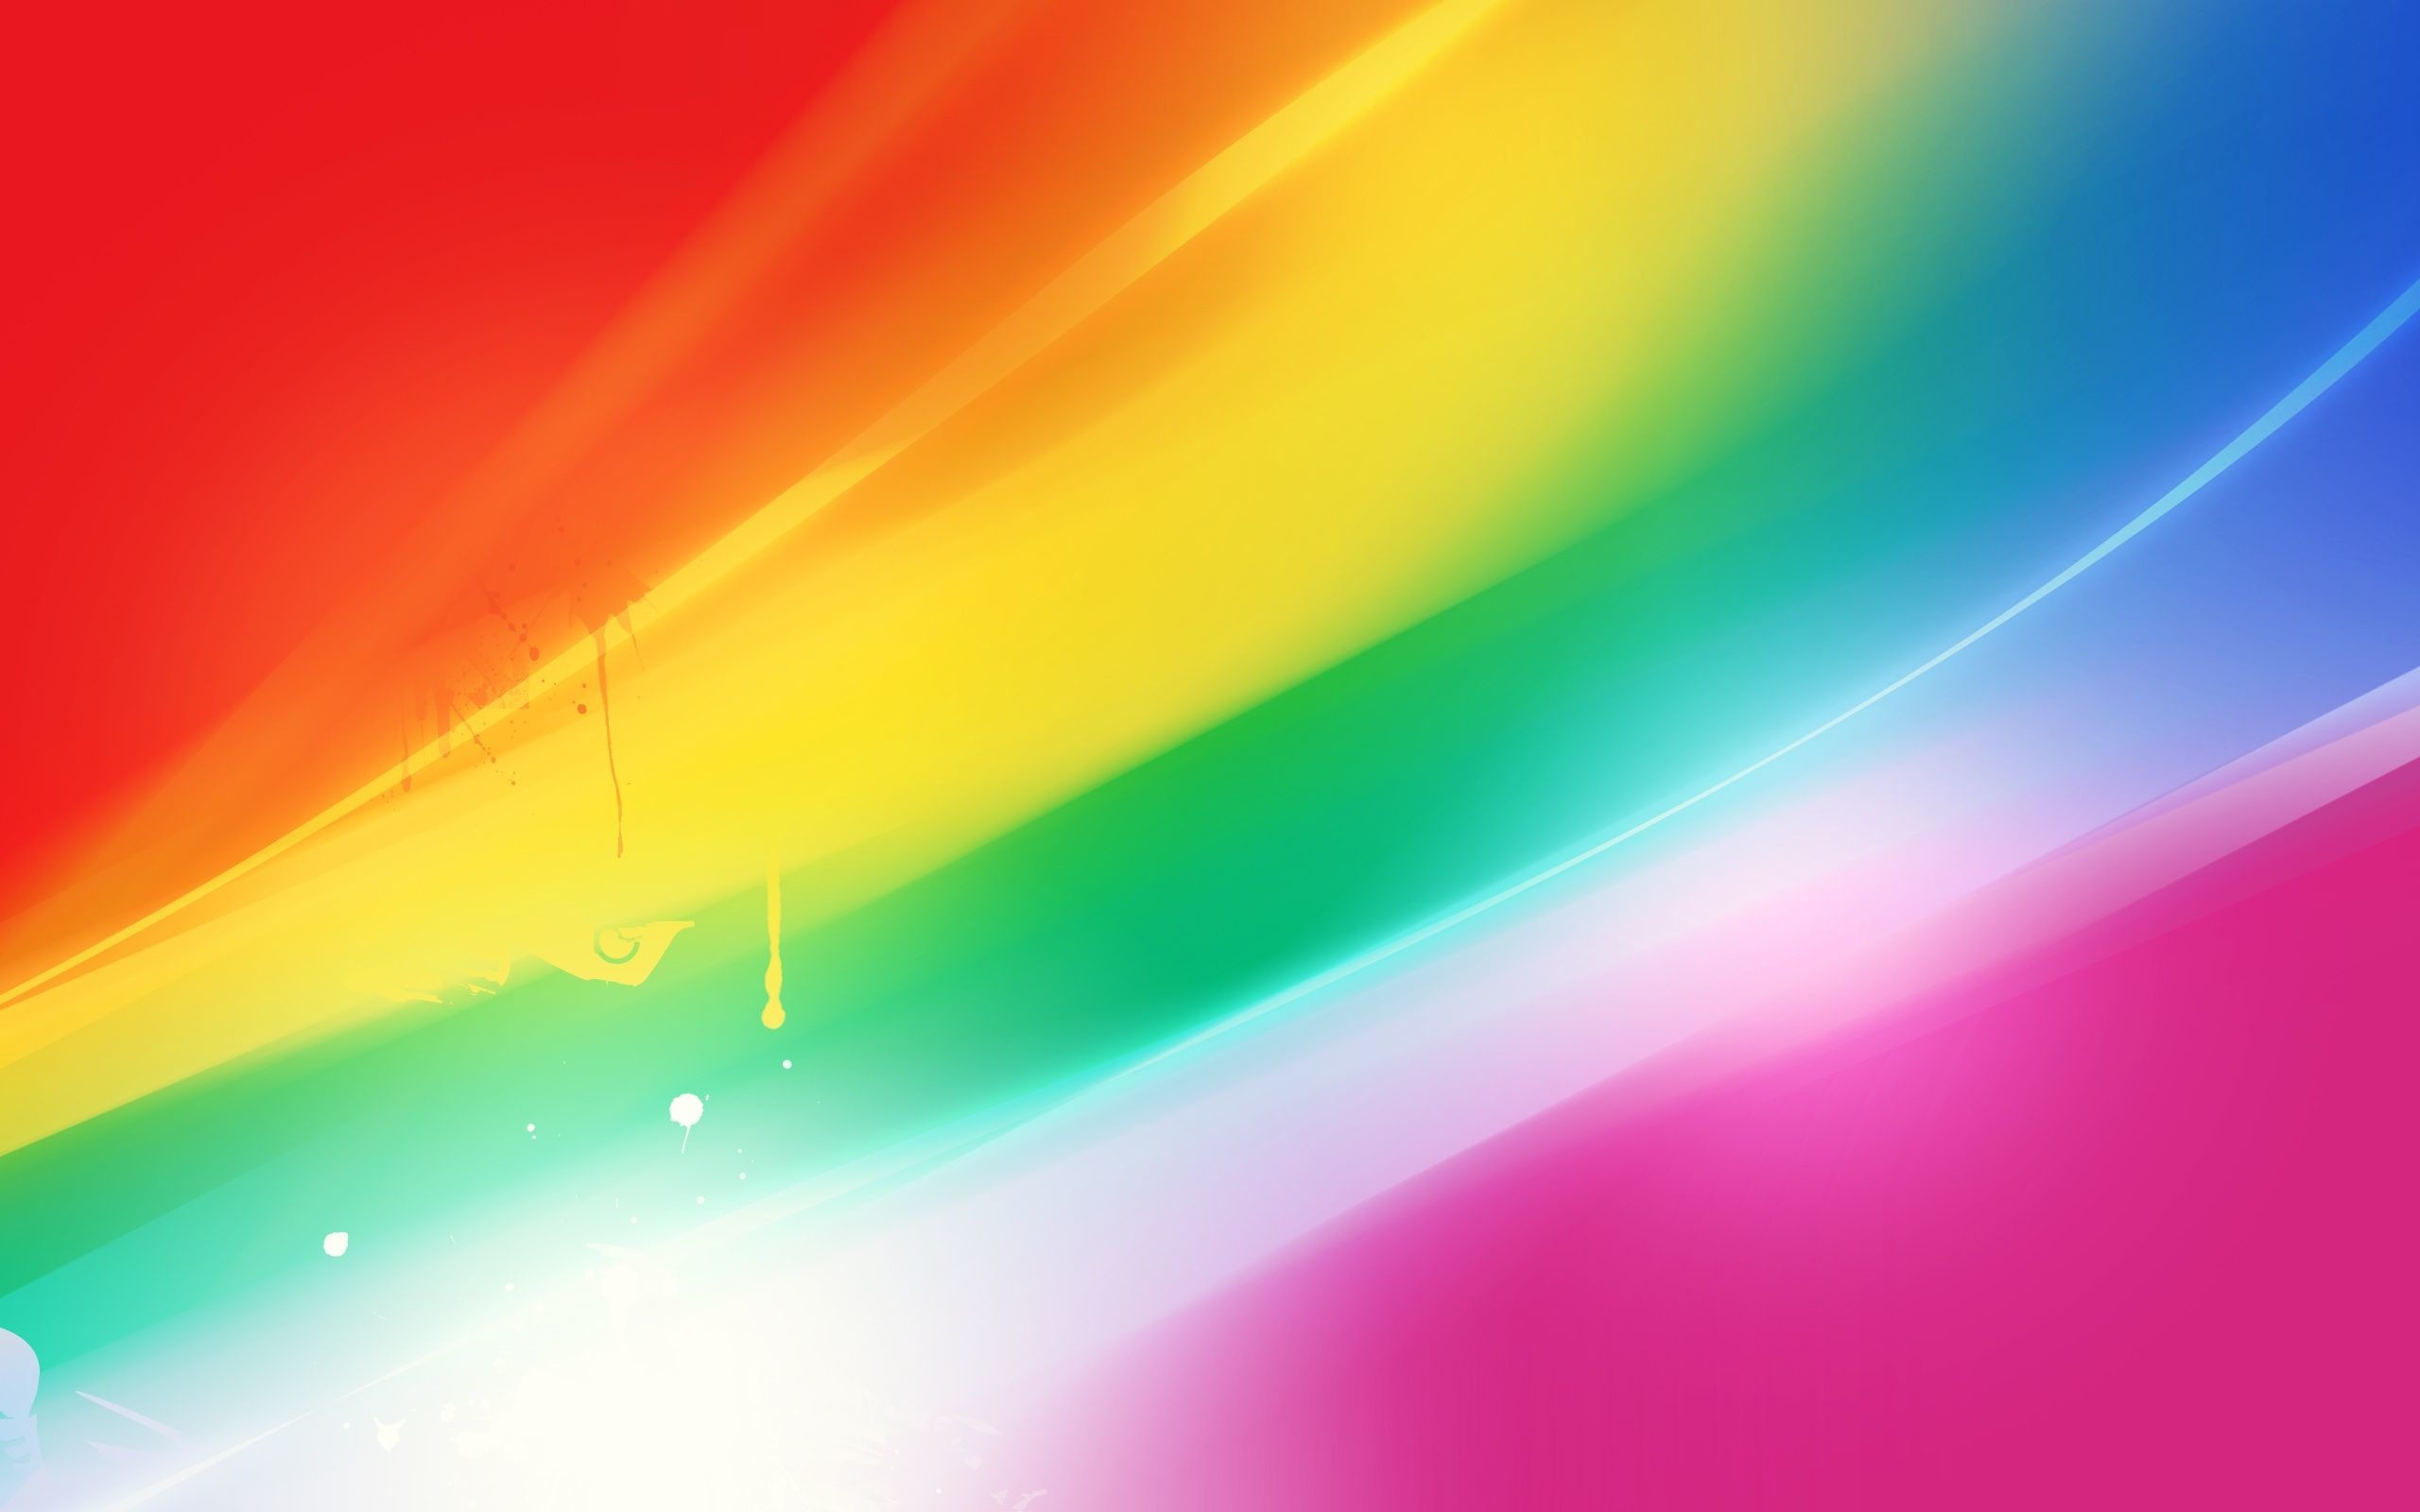 Lively rainbow hues, High-definition wallpapers, Zoey Anderson's collection, Rainbow spectrum, 2560x1600 HD Desktop